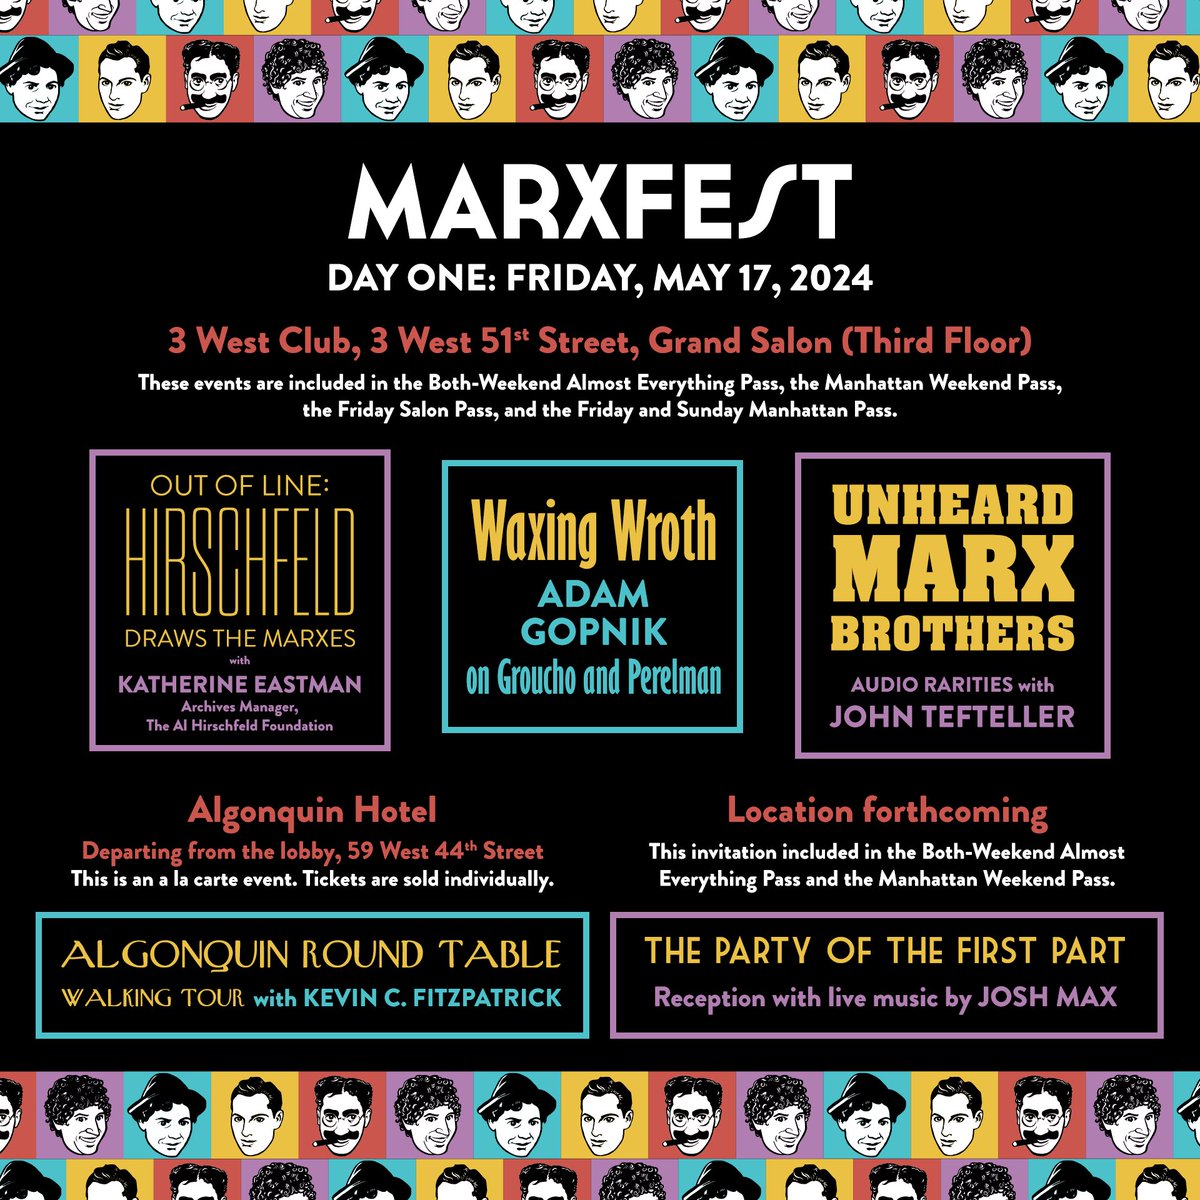 Hope you got tickets for @marxfest by now. Adam Gopnik, @AlHirschfeld Foundation, and me on the opening day. See full schedule for the big Marx Brothers festival marxfest.org